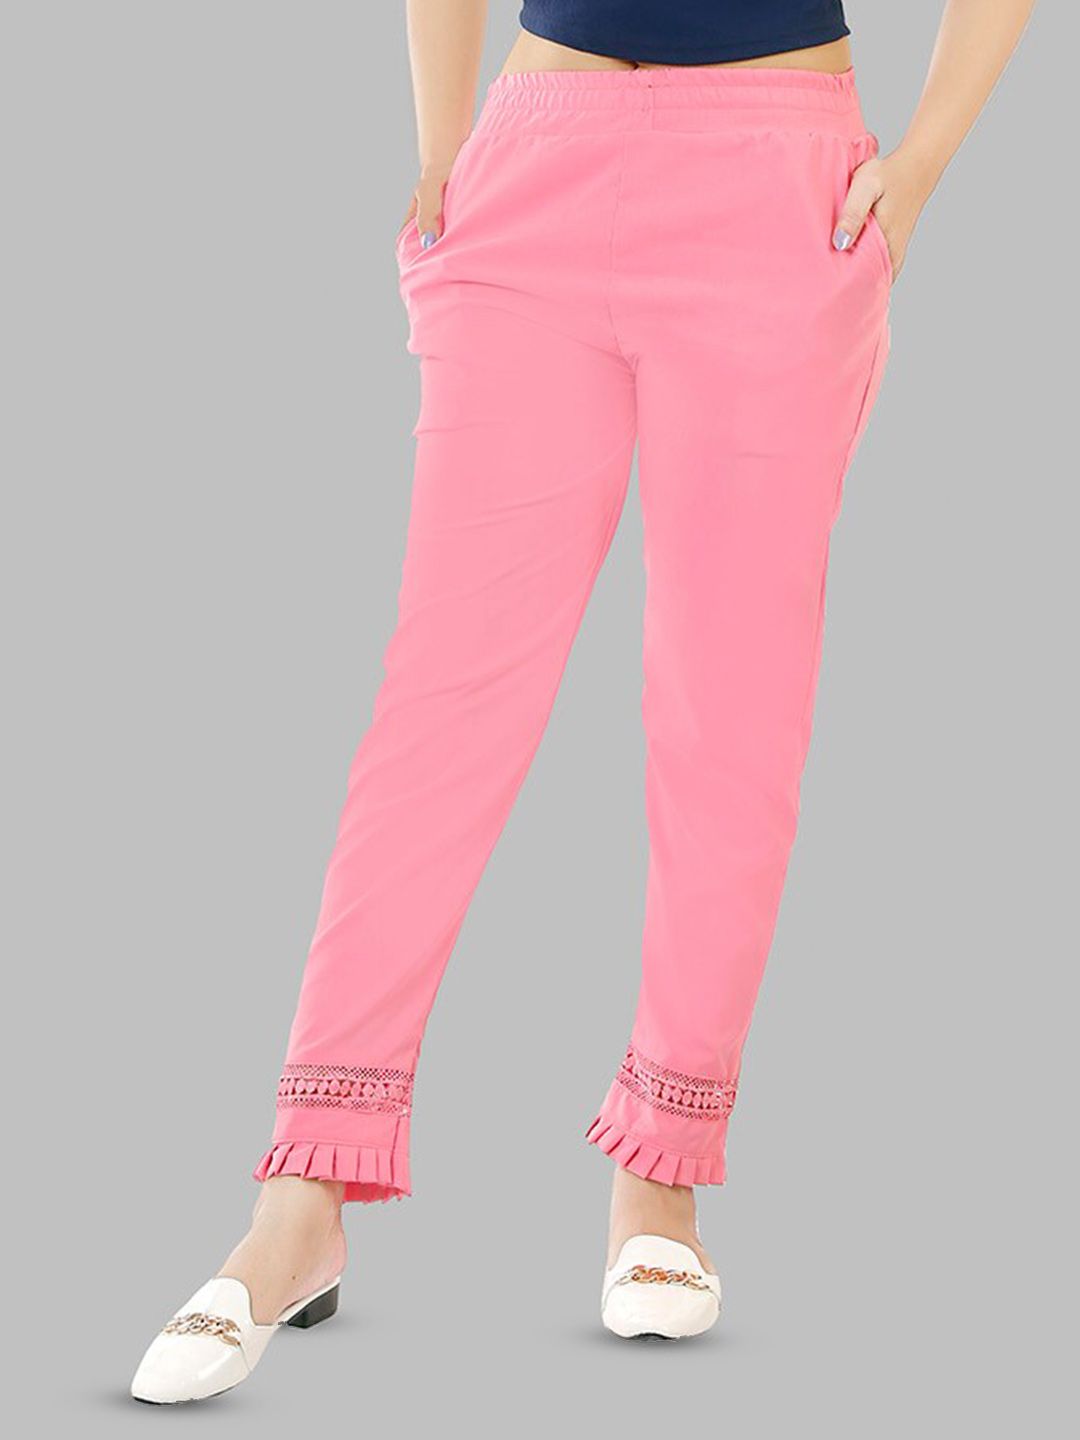 BAESD Women Pencil Slim Fit Mid-Rise Lint Free Cigarette Trouser Price in India